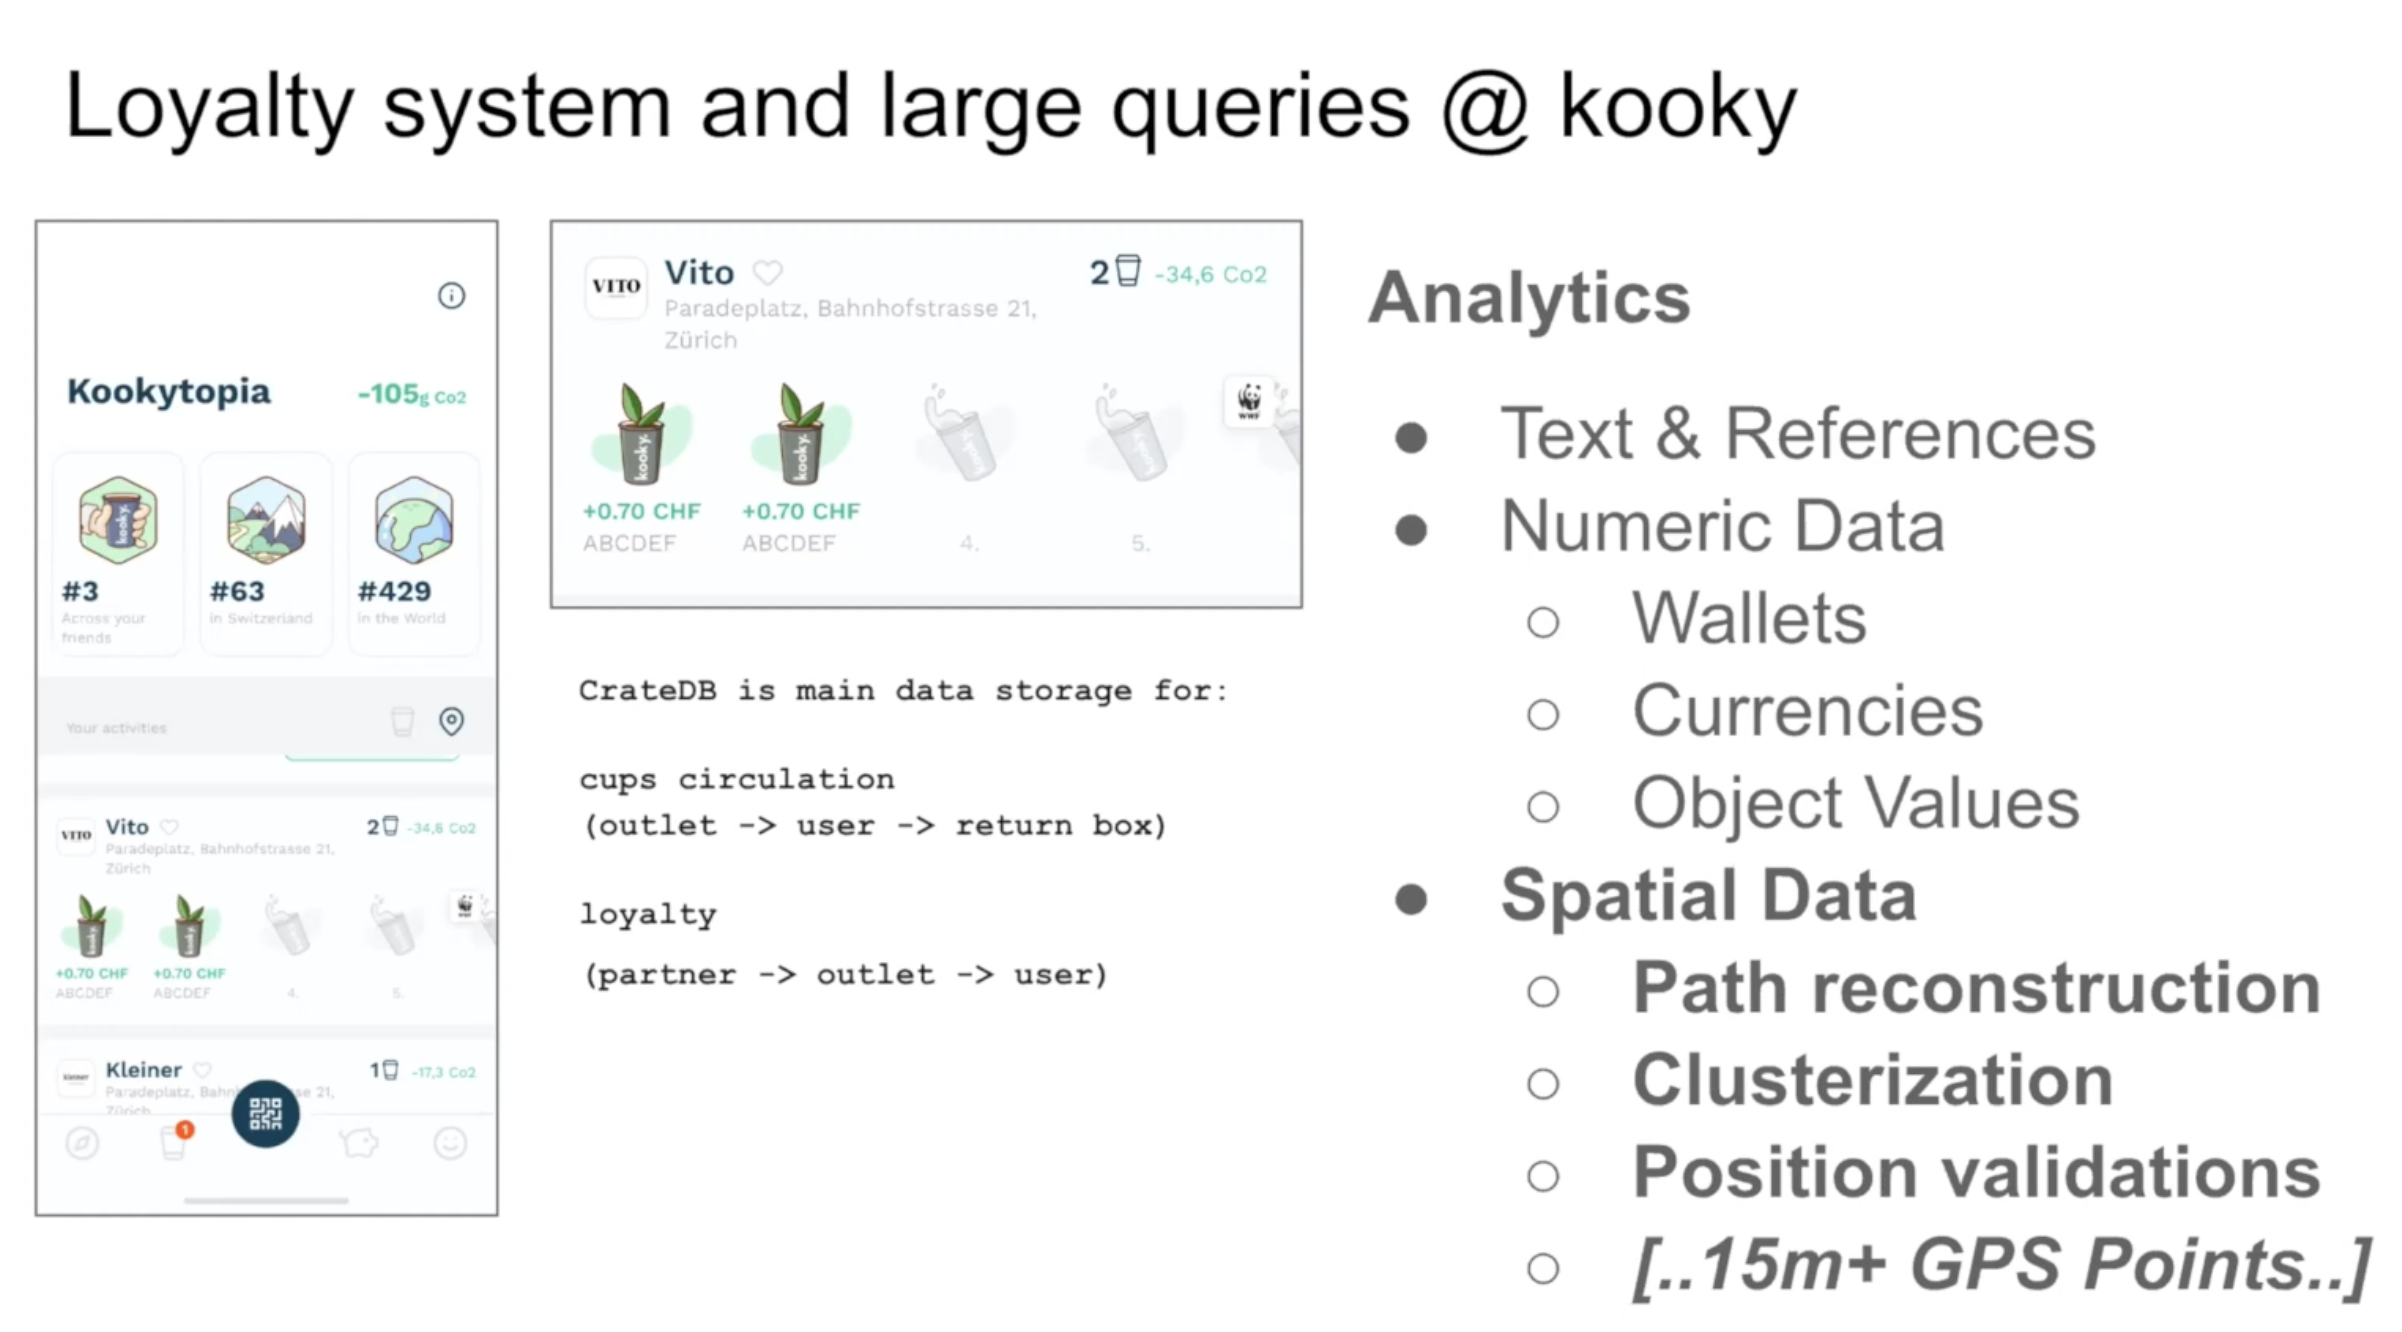 Loyalty System and large queries @ Kooky